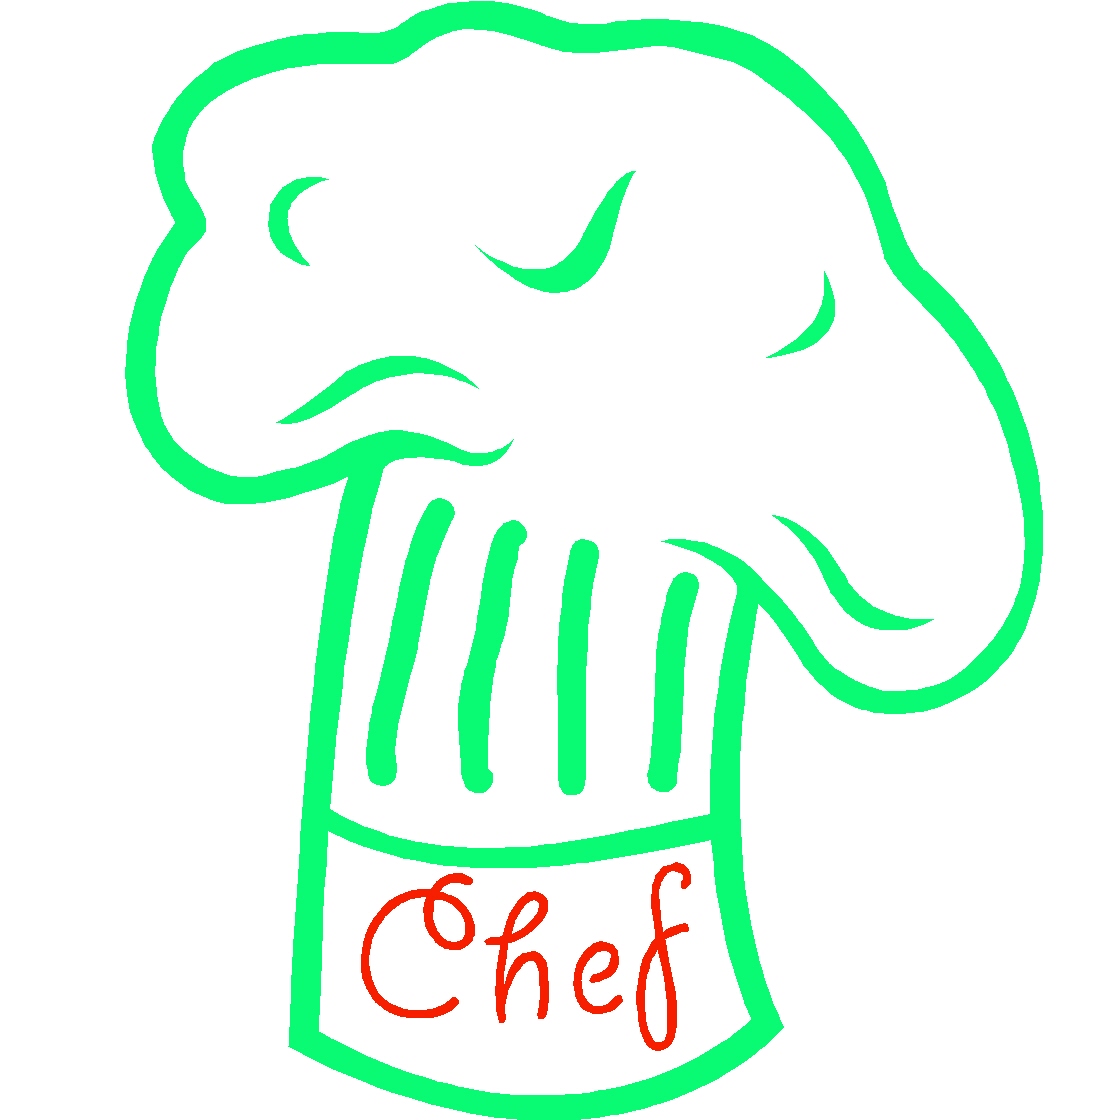 chef hat clipart download - photo #28